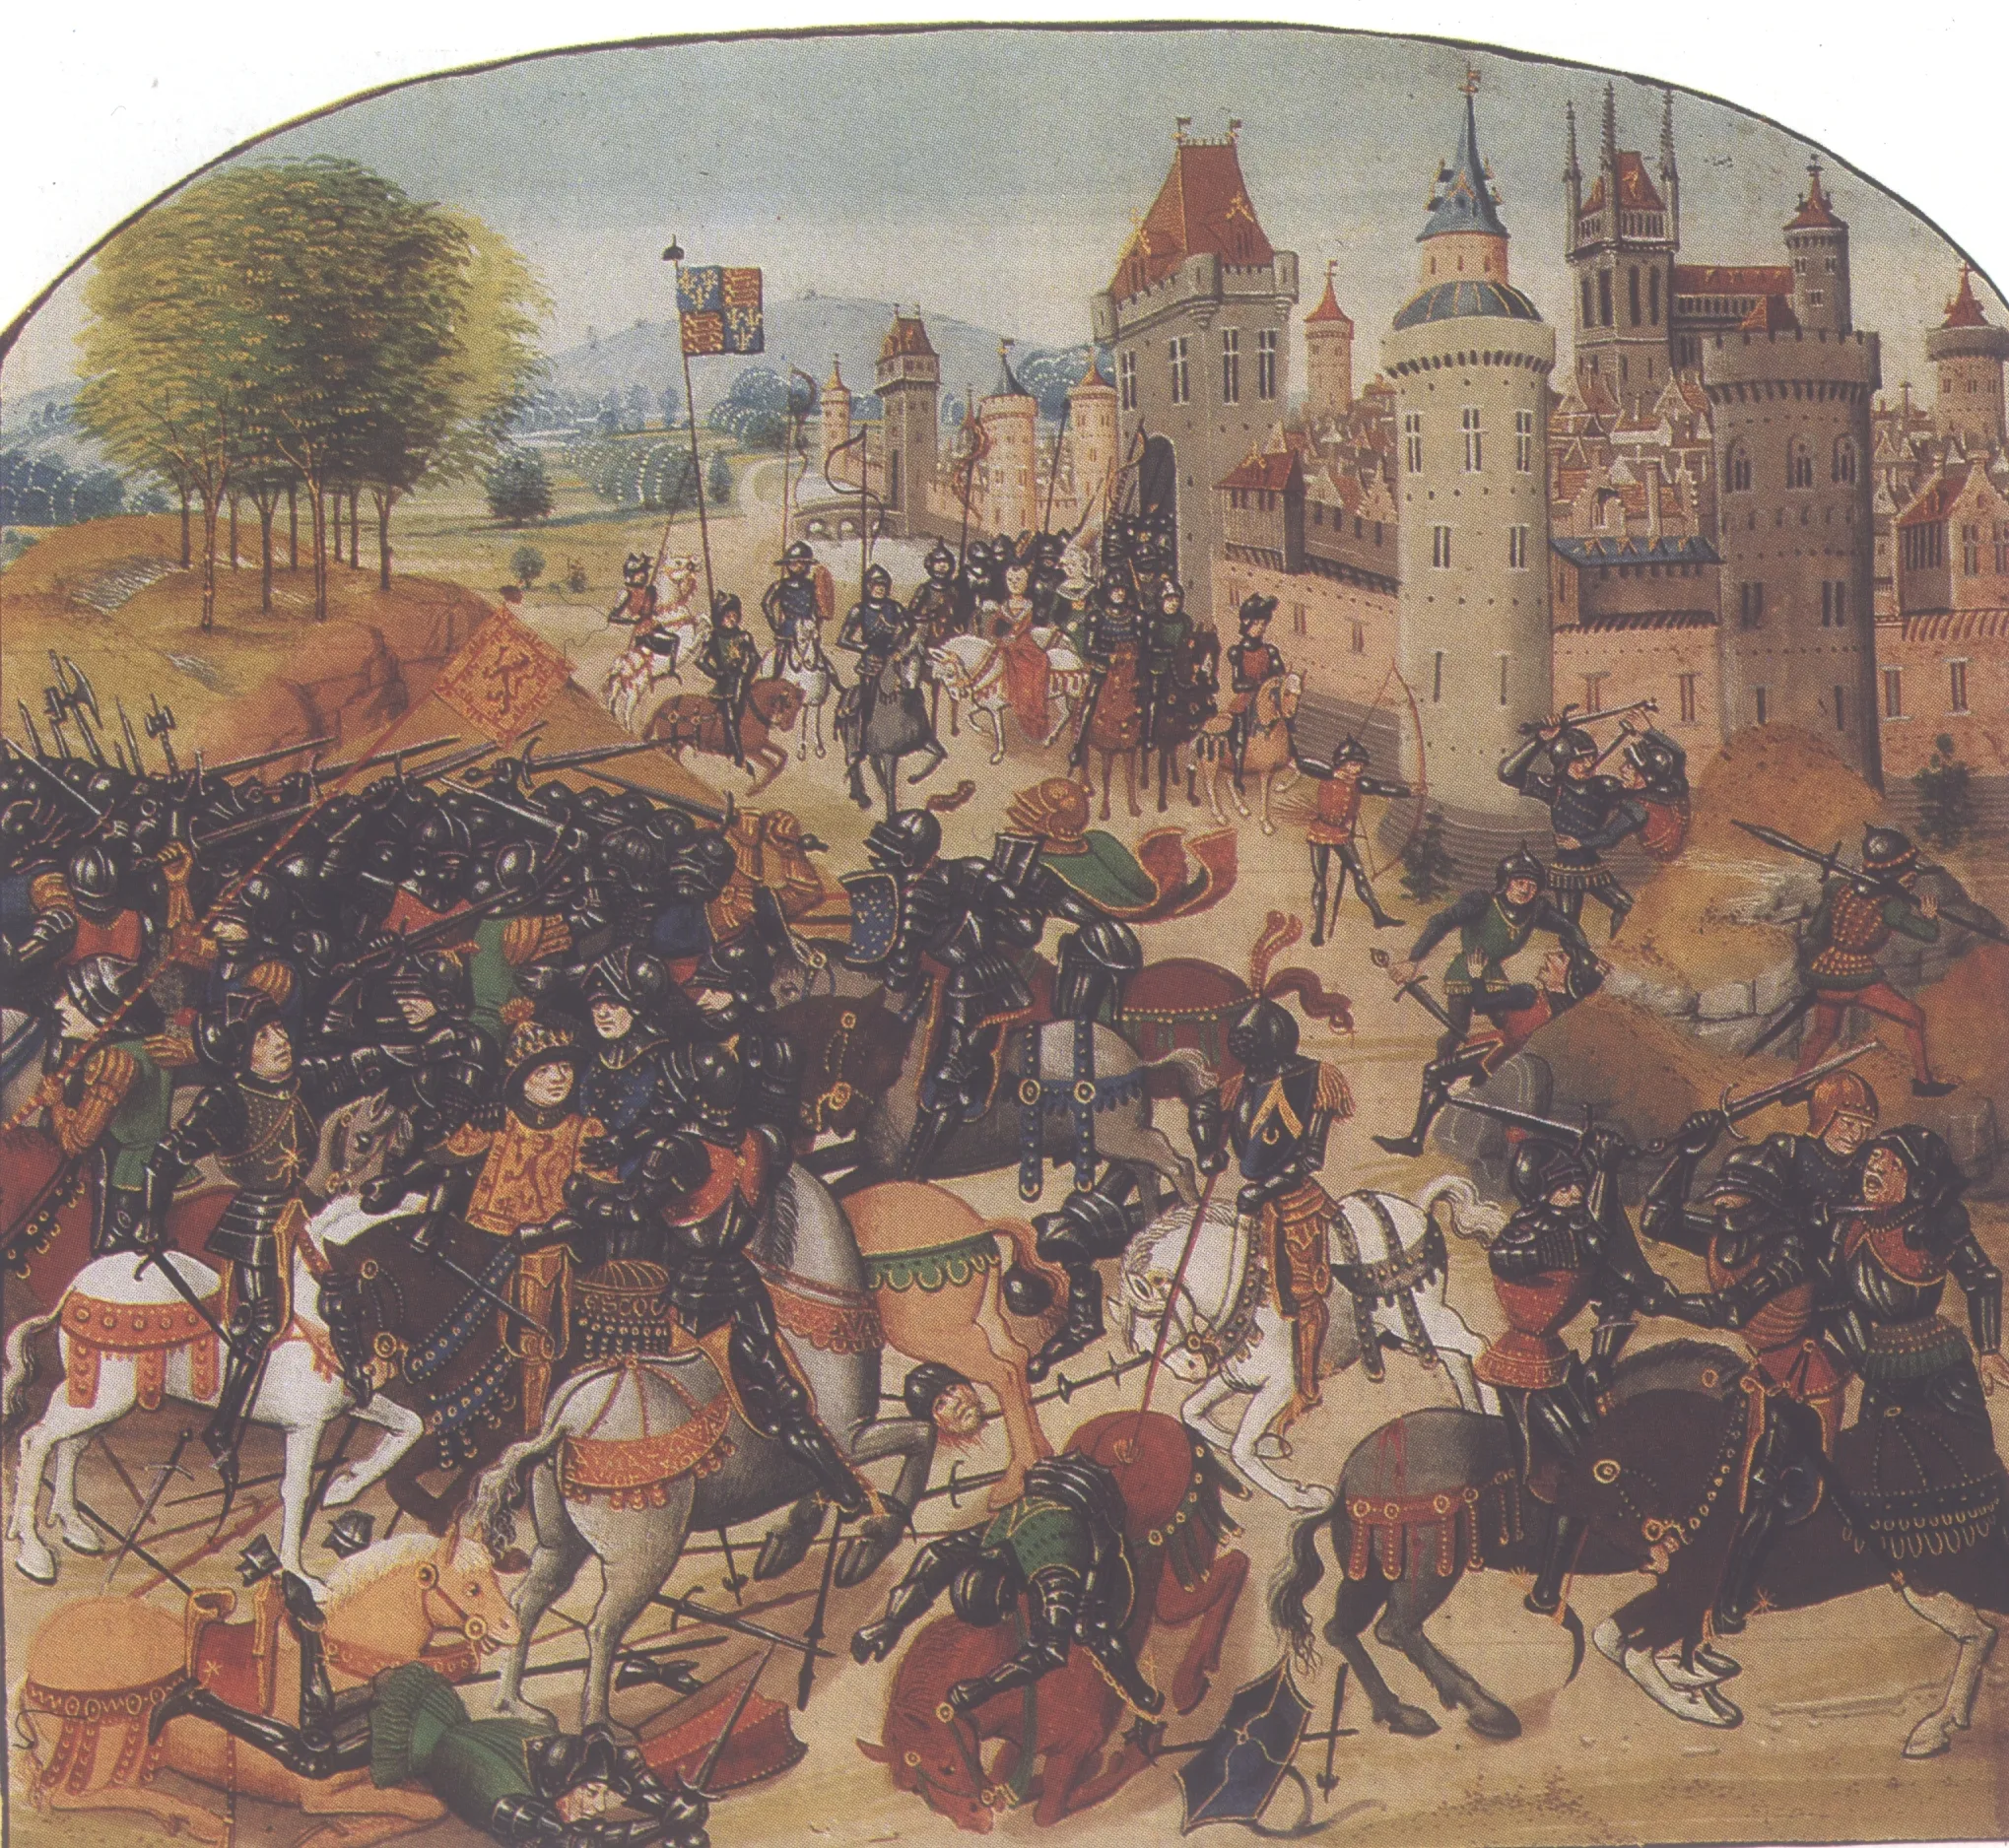 Photo showing: David II, King of Scots, taken prisoner (lower left) at Neville's Cross, from an edition of Froissart's Chronicles.